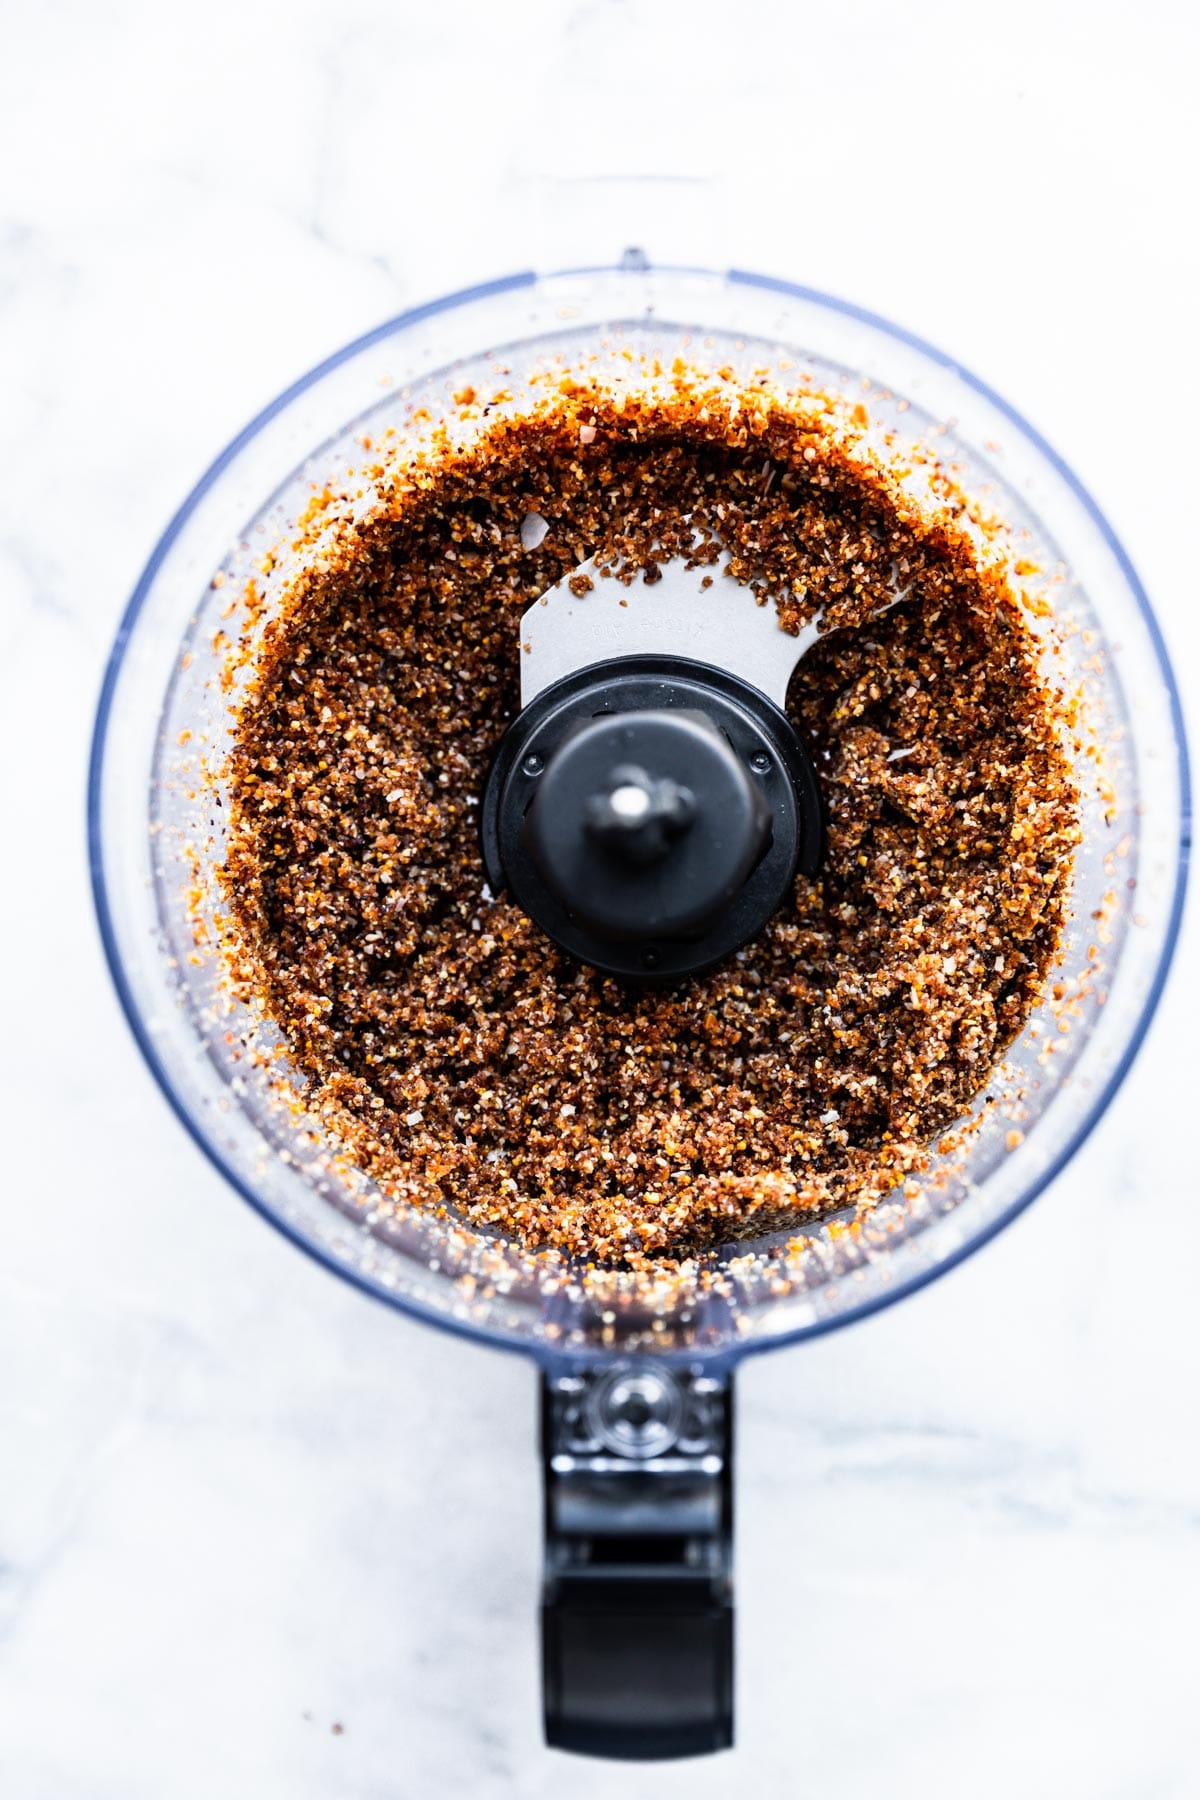 Overhead view food processor bowl filled with crust ingredients for chocolate cashew fig bars.